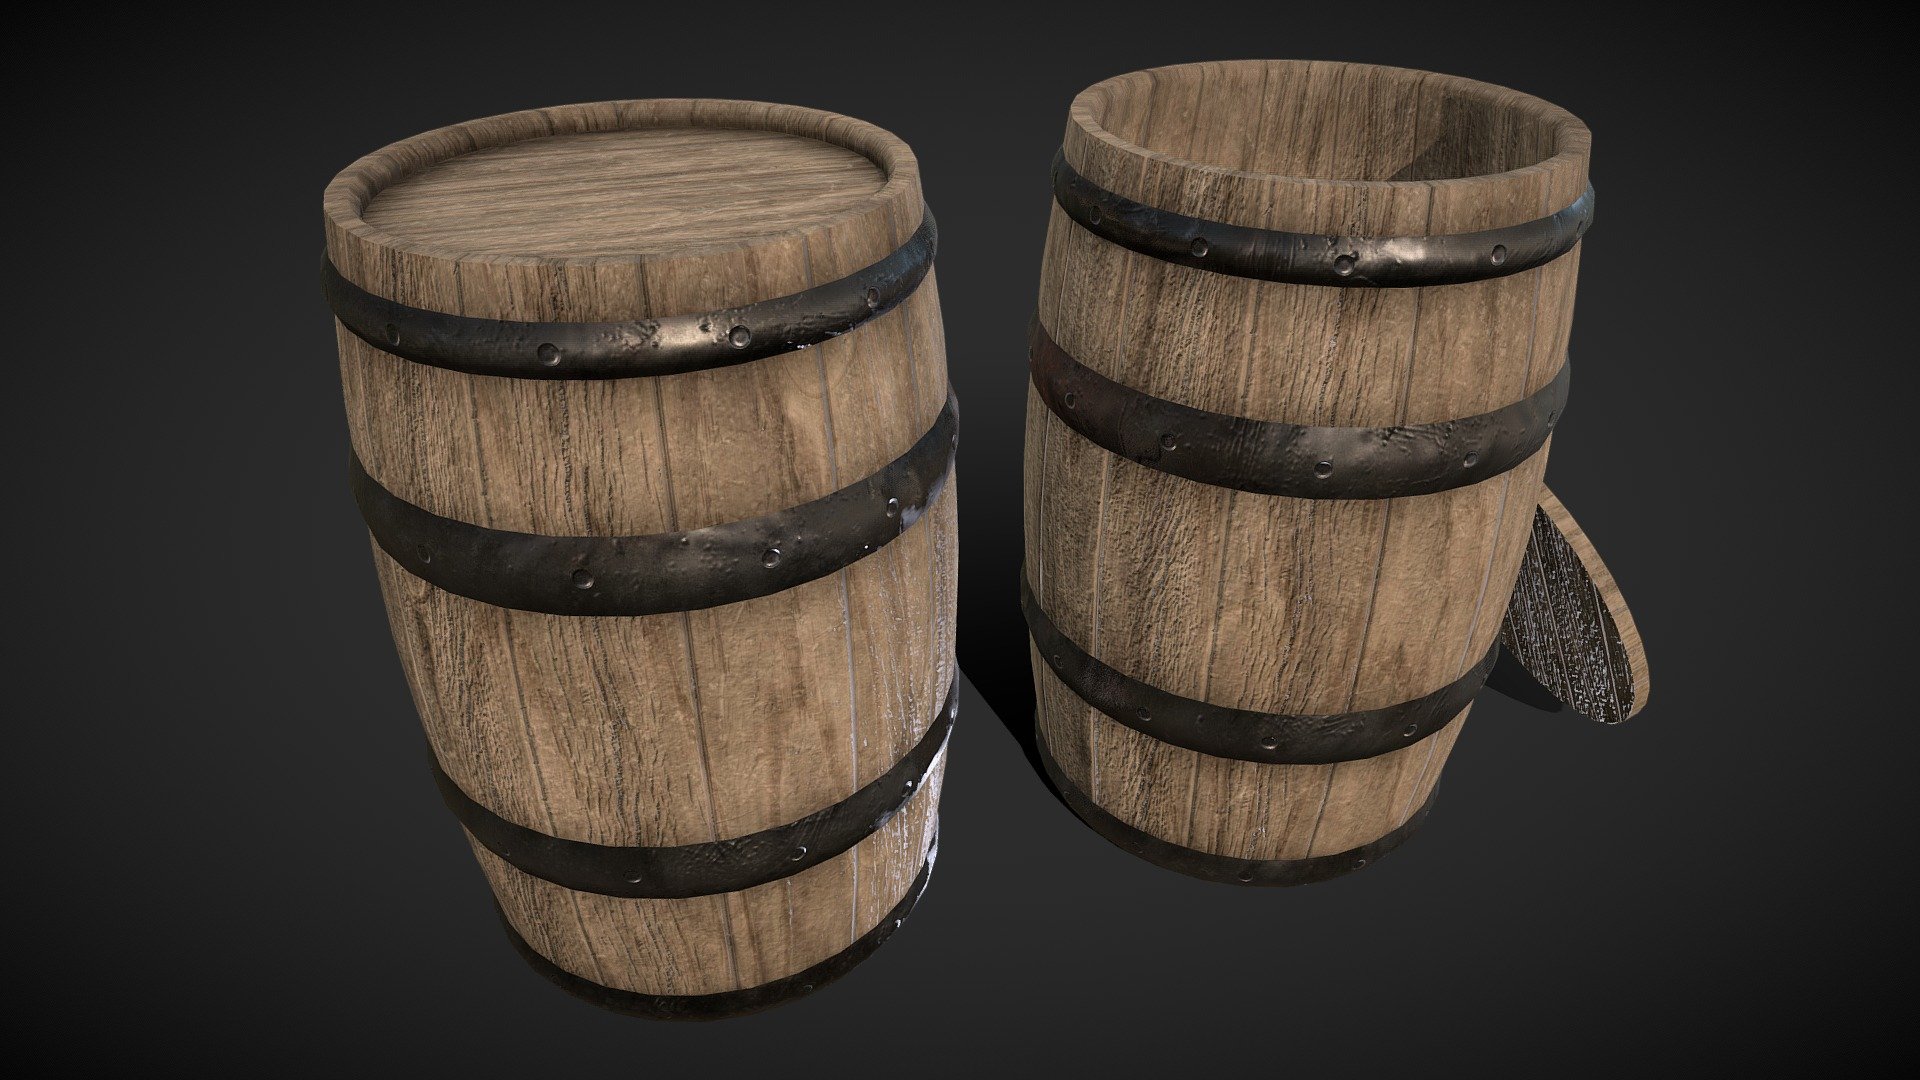 4k textures (unity5 and unrealEngine4).

Total polys: 1766.

Total verts: 1856.

Unity5 textures: Albedo-Transparency , Metallic-Smoothness , Normal.

UnrealEngine4 Textures: Base-Color , Normal , Occlusion-Roughness-Metallic.

Fbx and Obj files 3d model